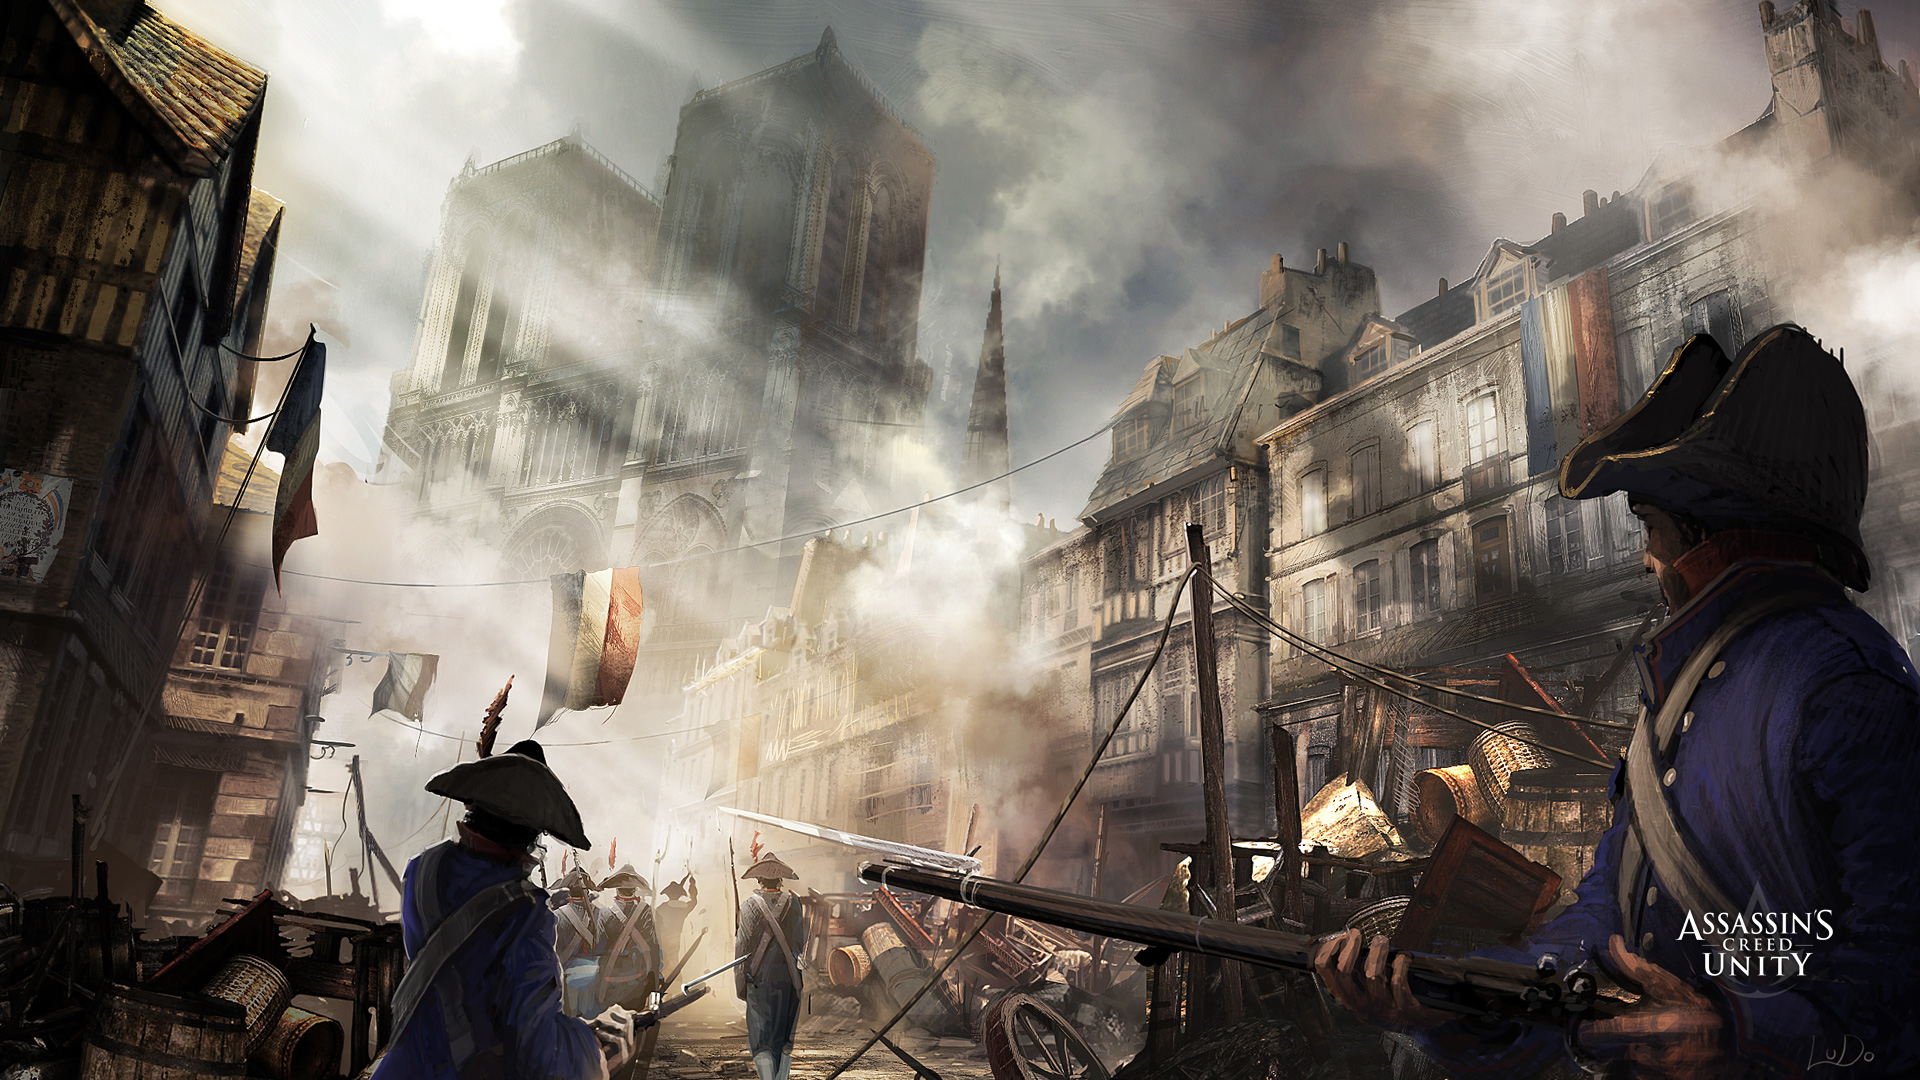 video game, assassin's creed: unity, assassin's creed Desktop home screen Wallpaper